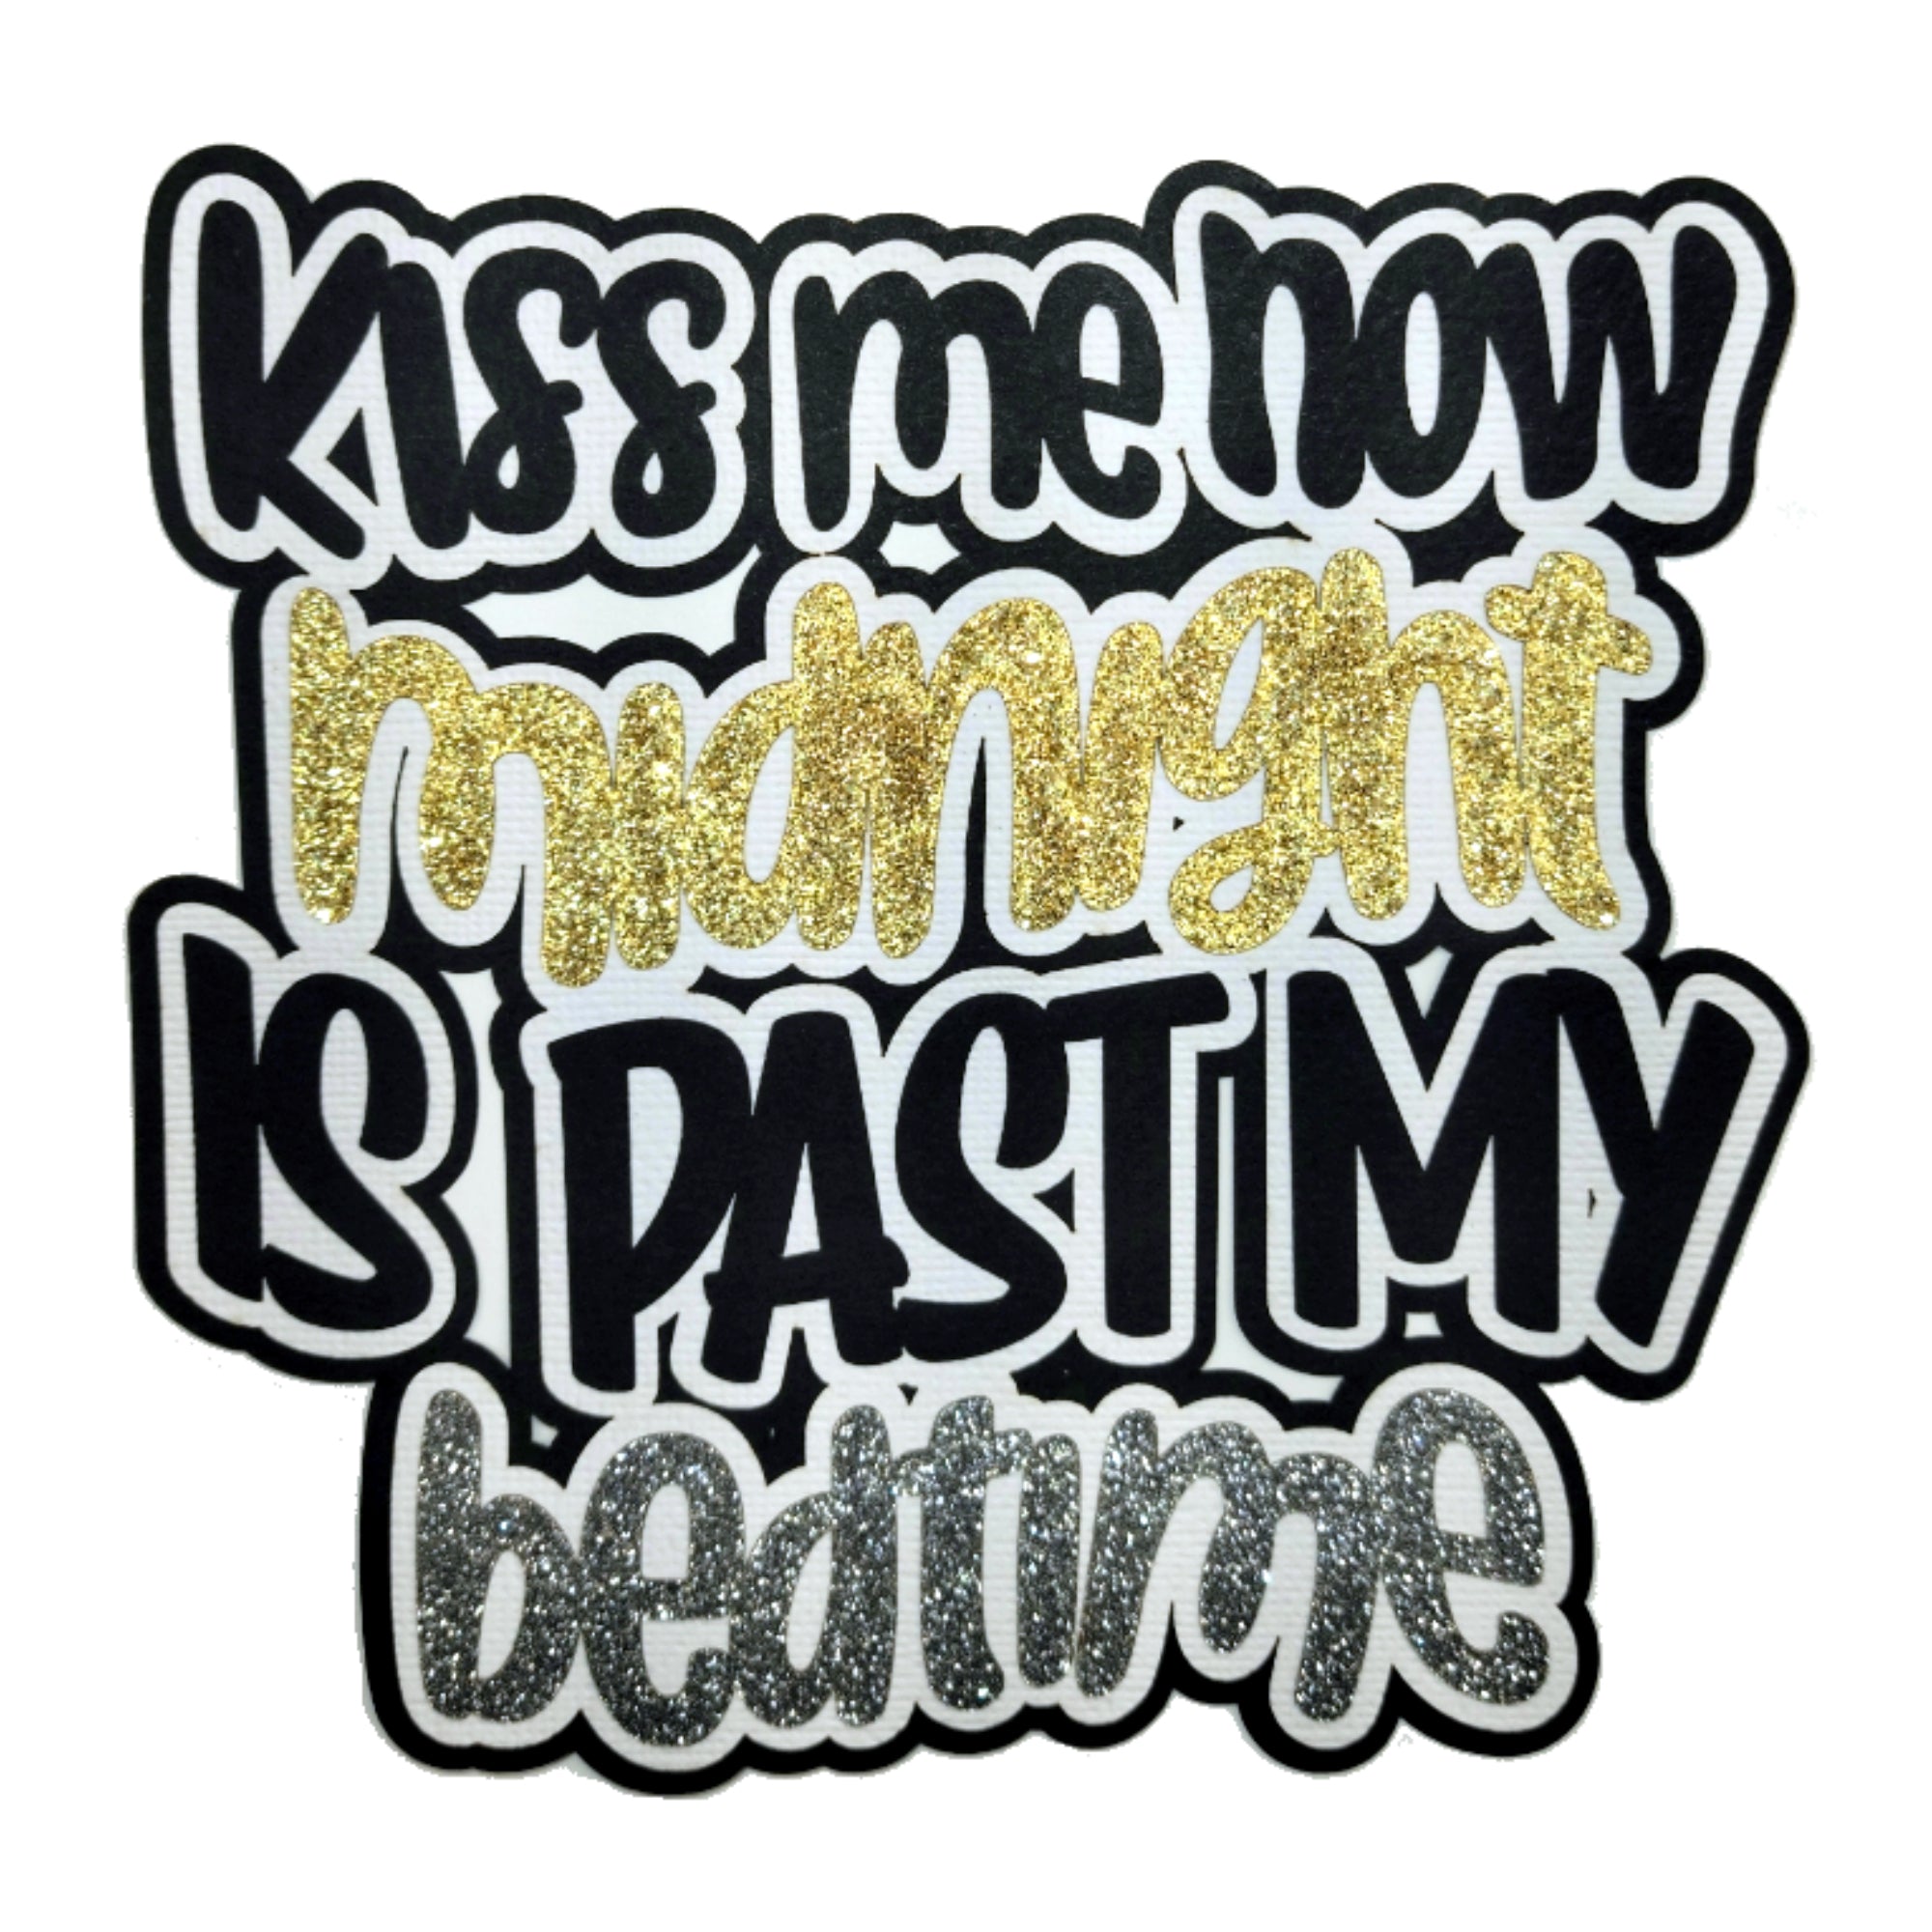 Kiss Me Now Midnight Is Past My Bedtime 6x6 Fully-Assembled Laser Cut Scrapbook Embellishment by SSC Laser Designs